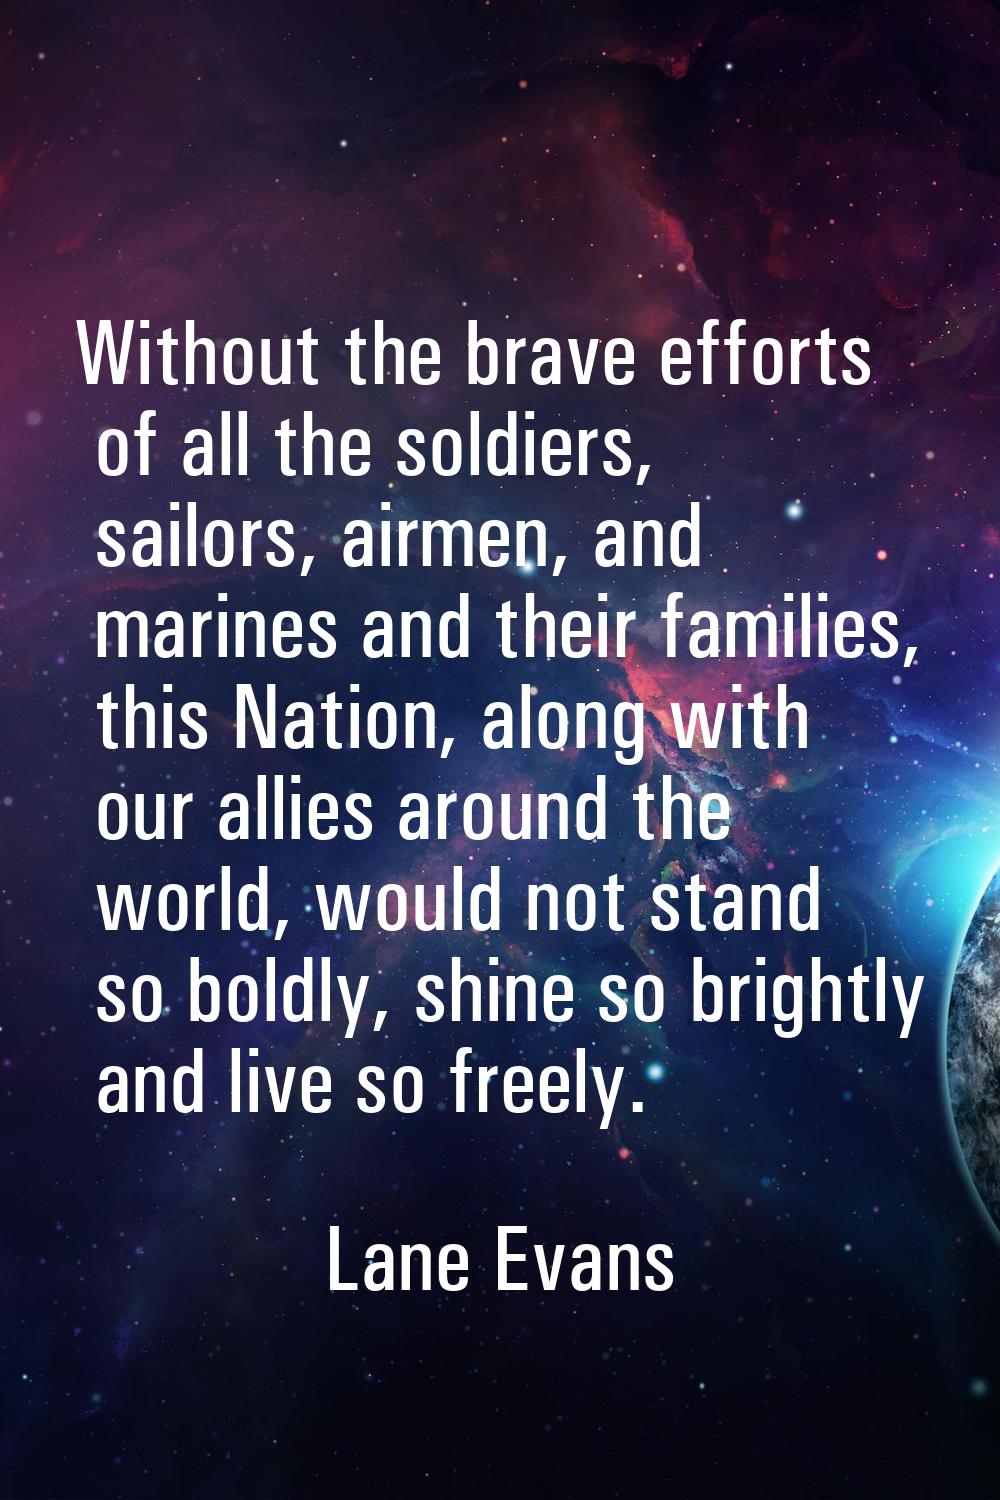 Without the brave efforts of all the soldiers, sailors, airmen, and marines and their families, thi